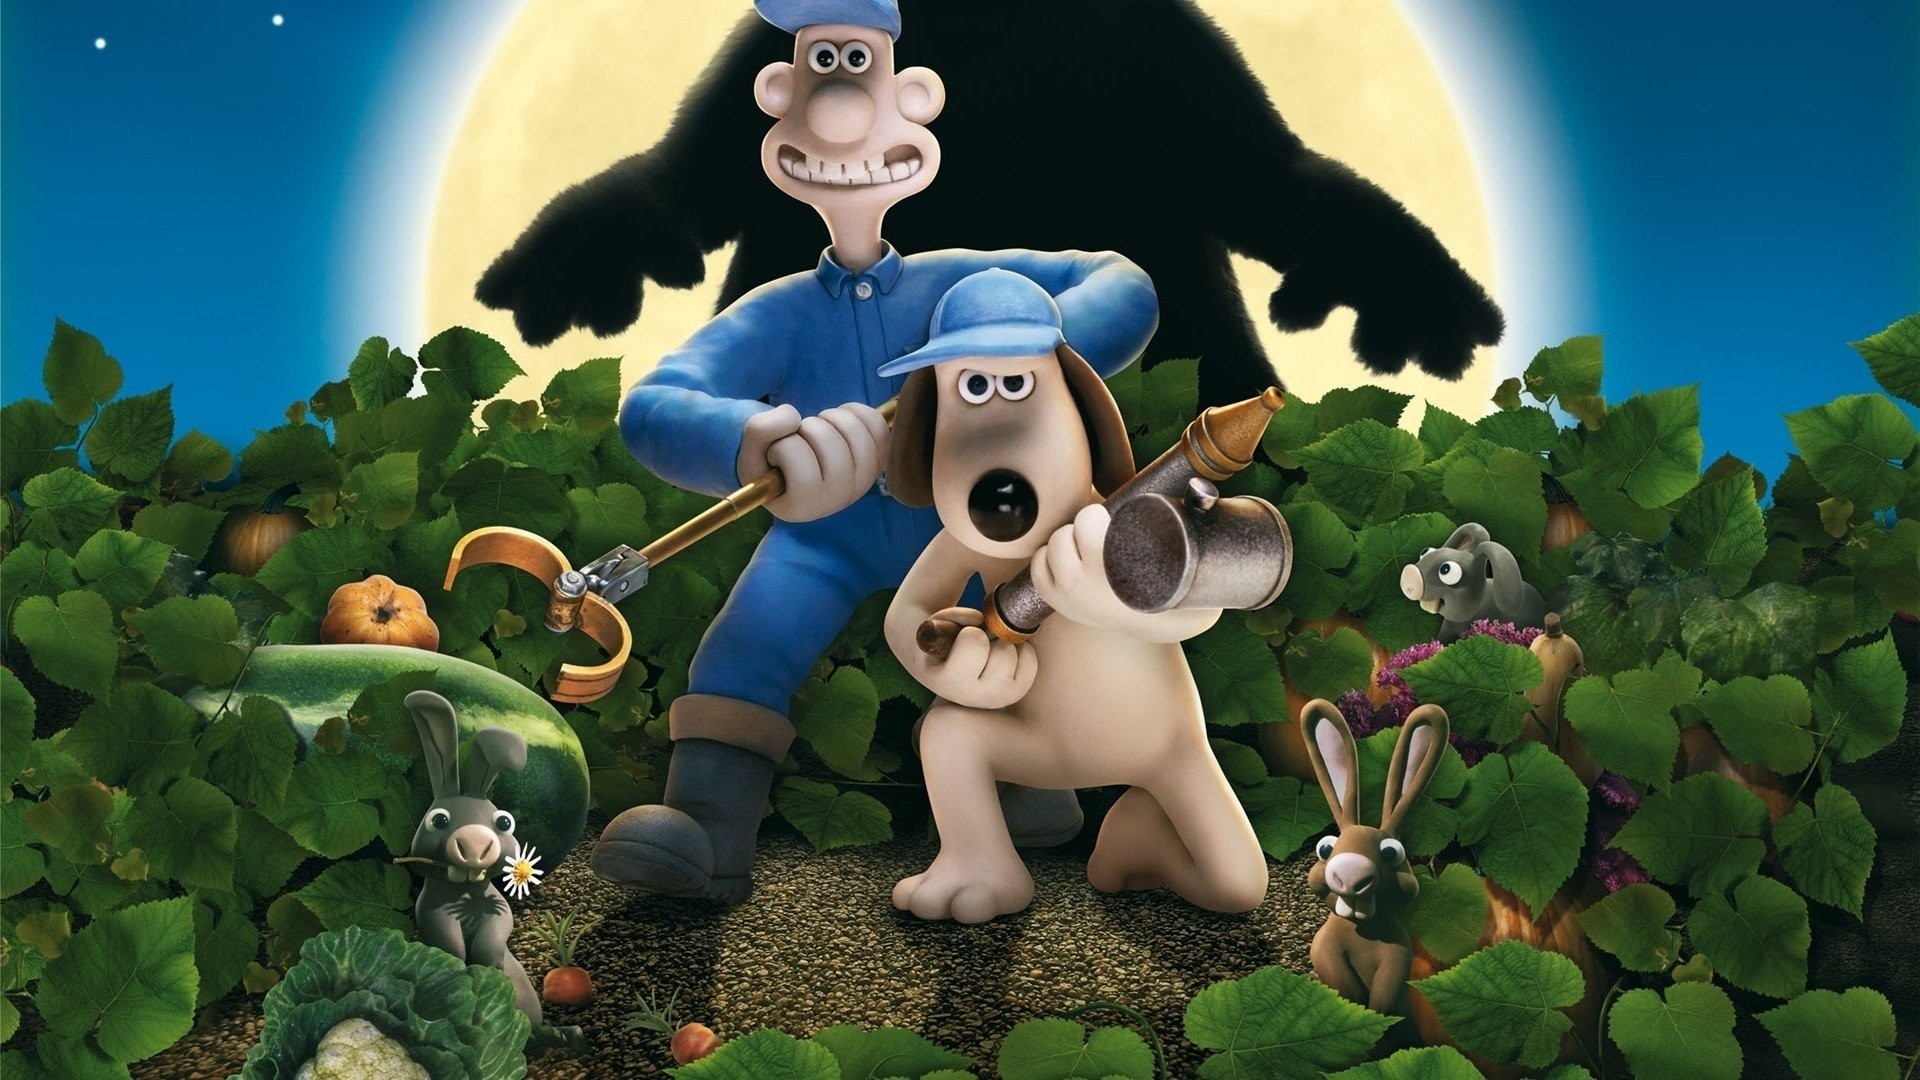 1920x1080 Movie - Wallace & Gromit: The Curse of the Were-Rabbit Wallpaper